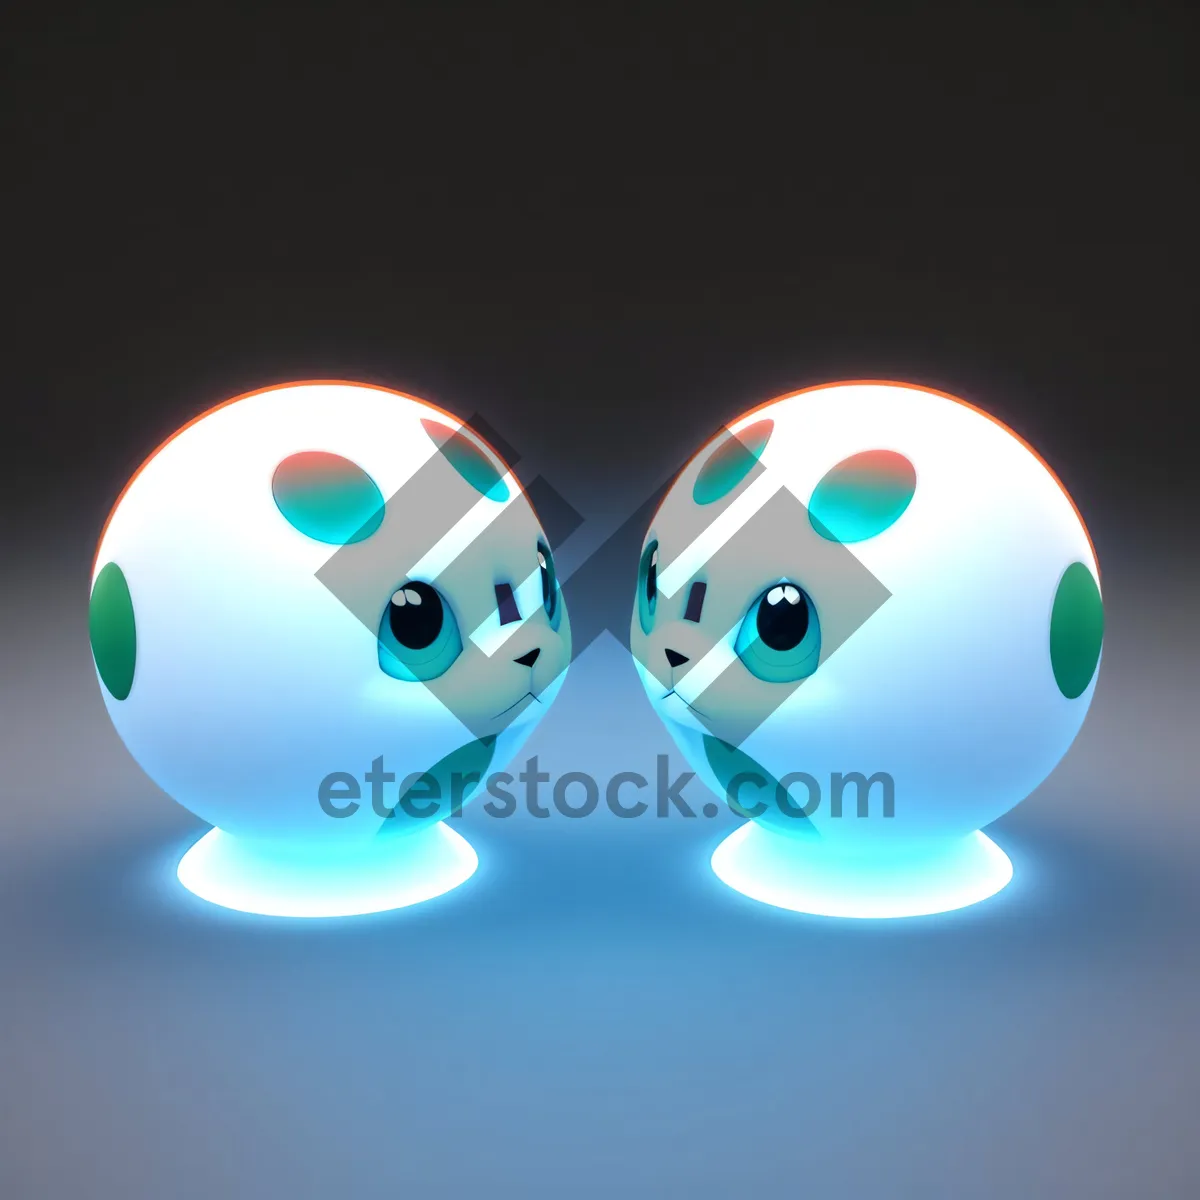 Picture of Cartoon Globe Ball Icon with 3D Design